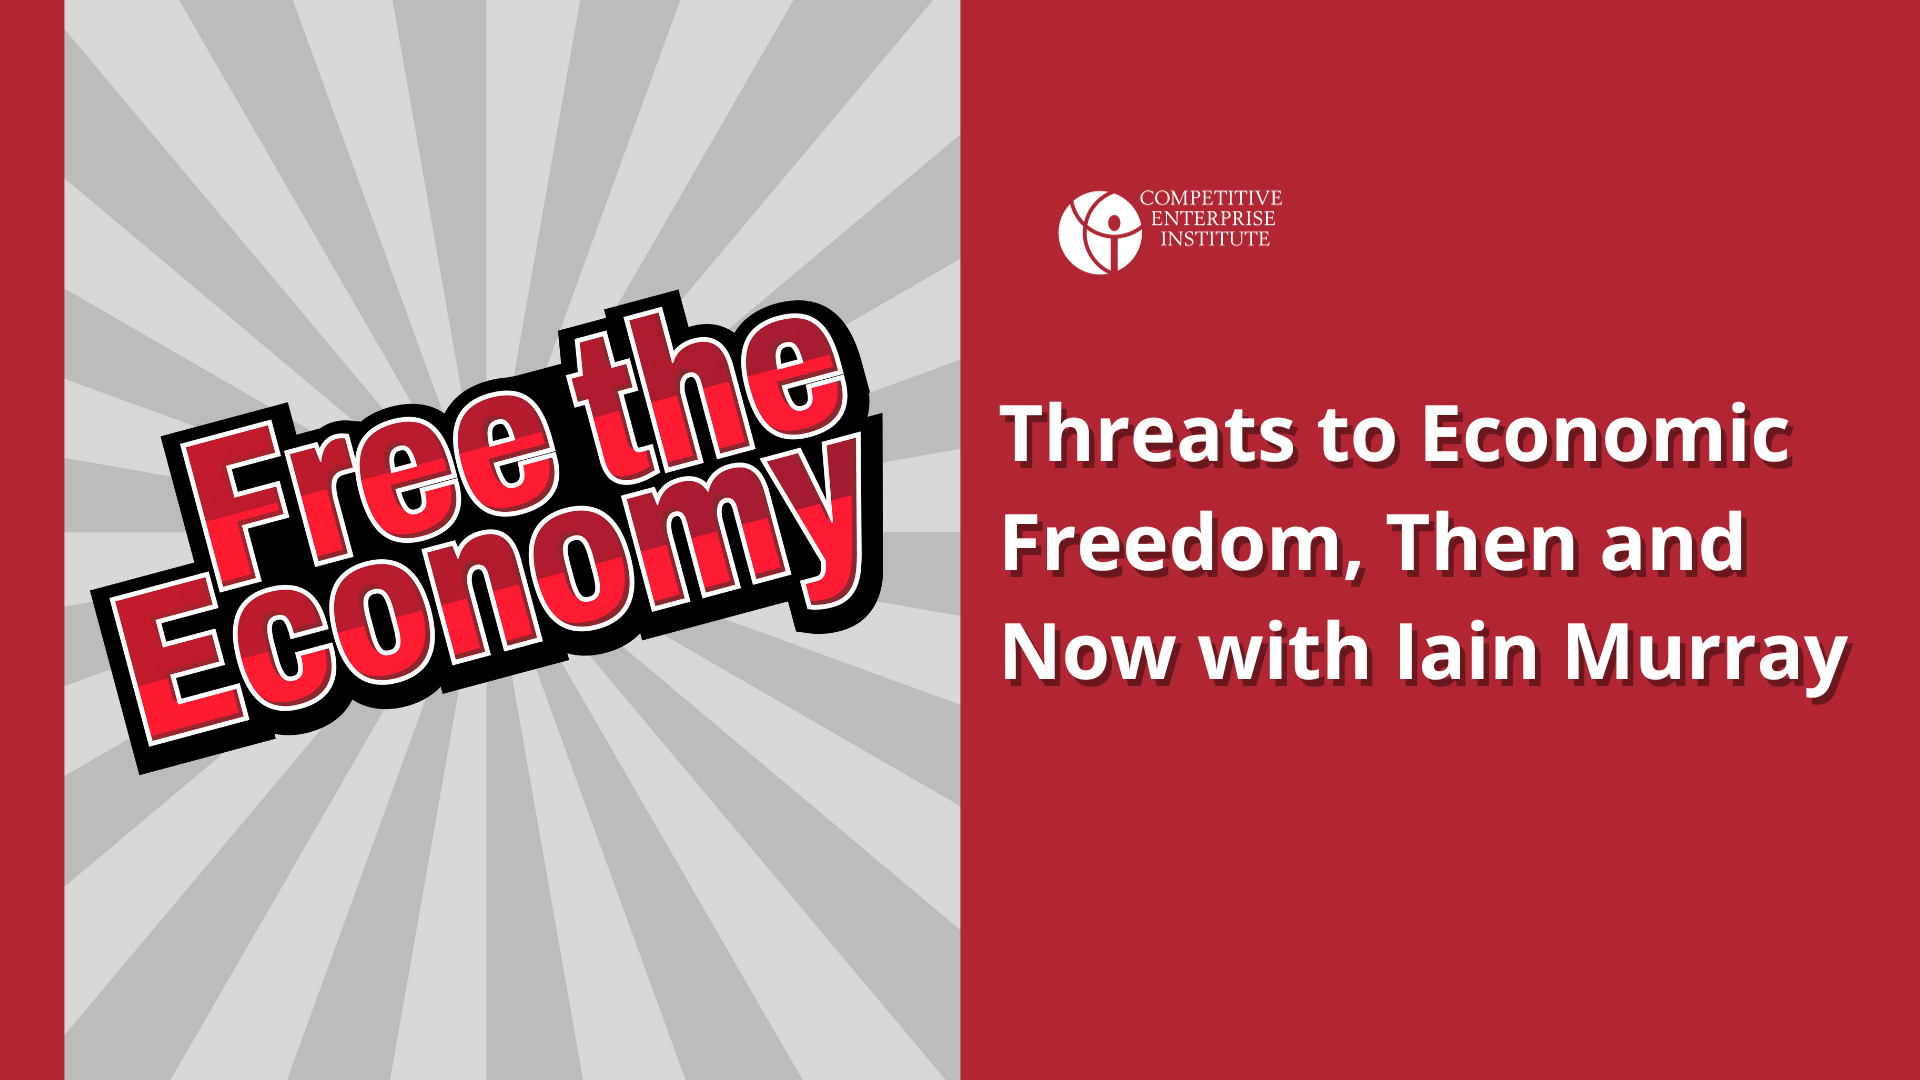 Threats to Economic Freedom, Then and Now with Iain Murray